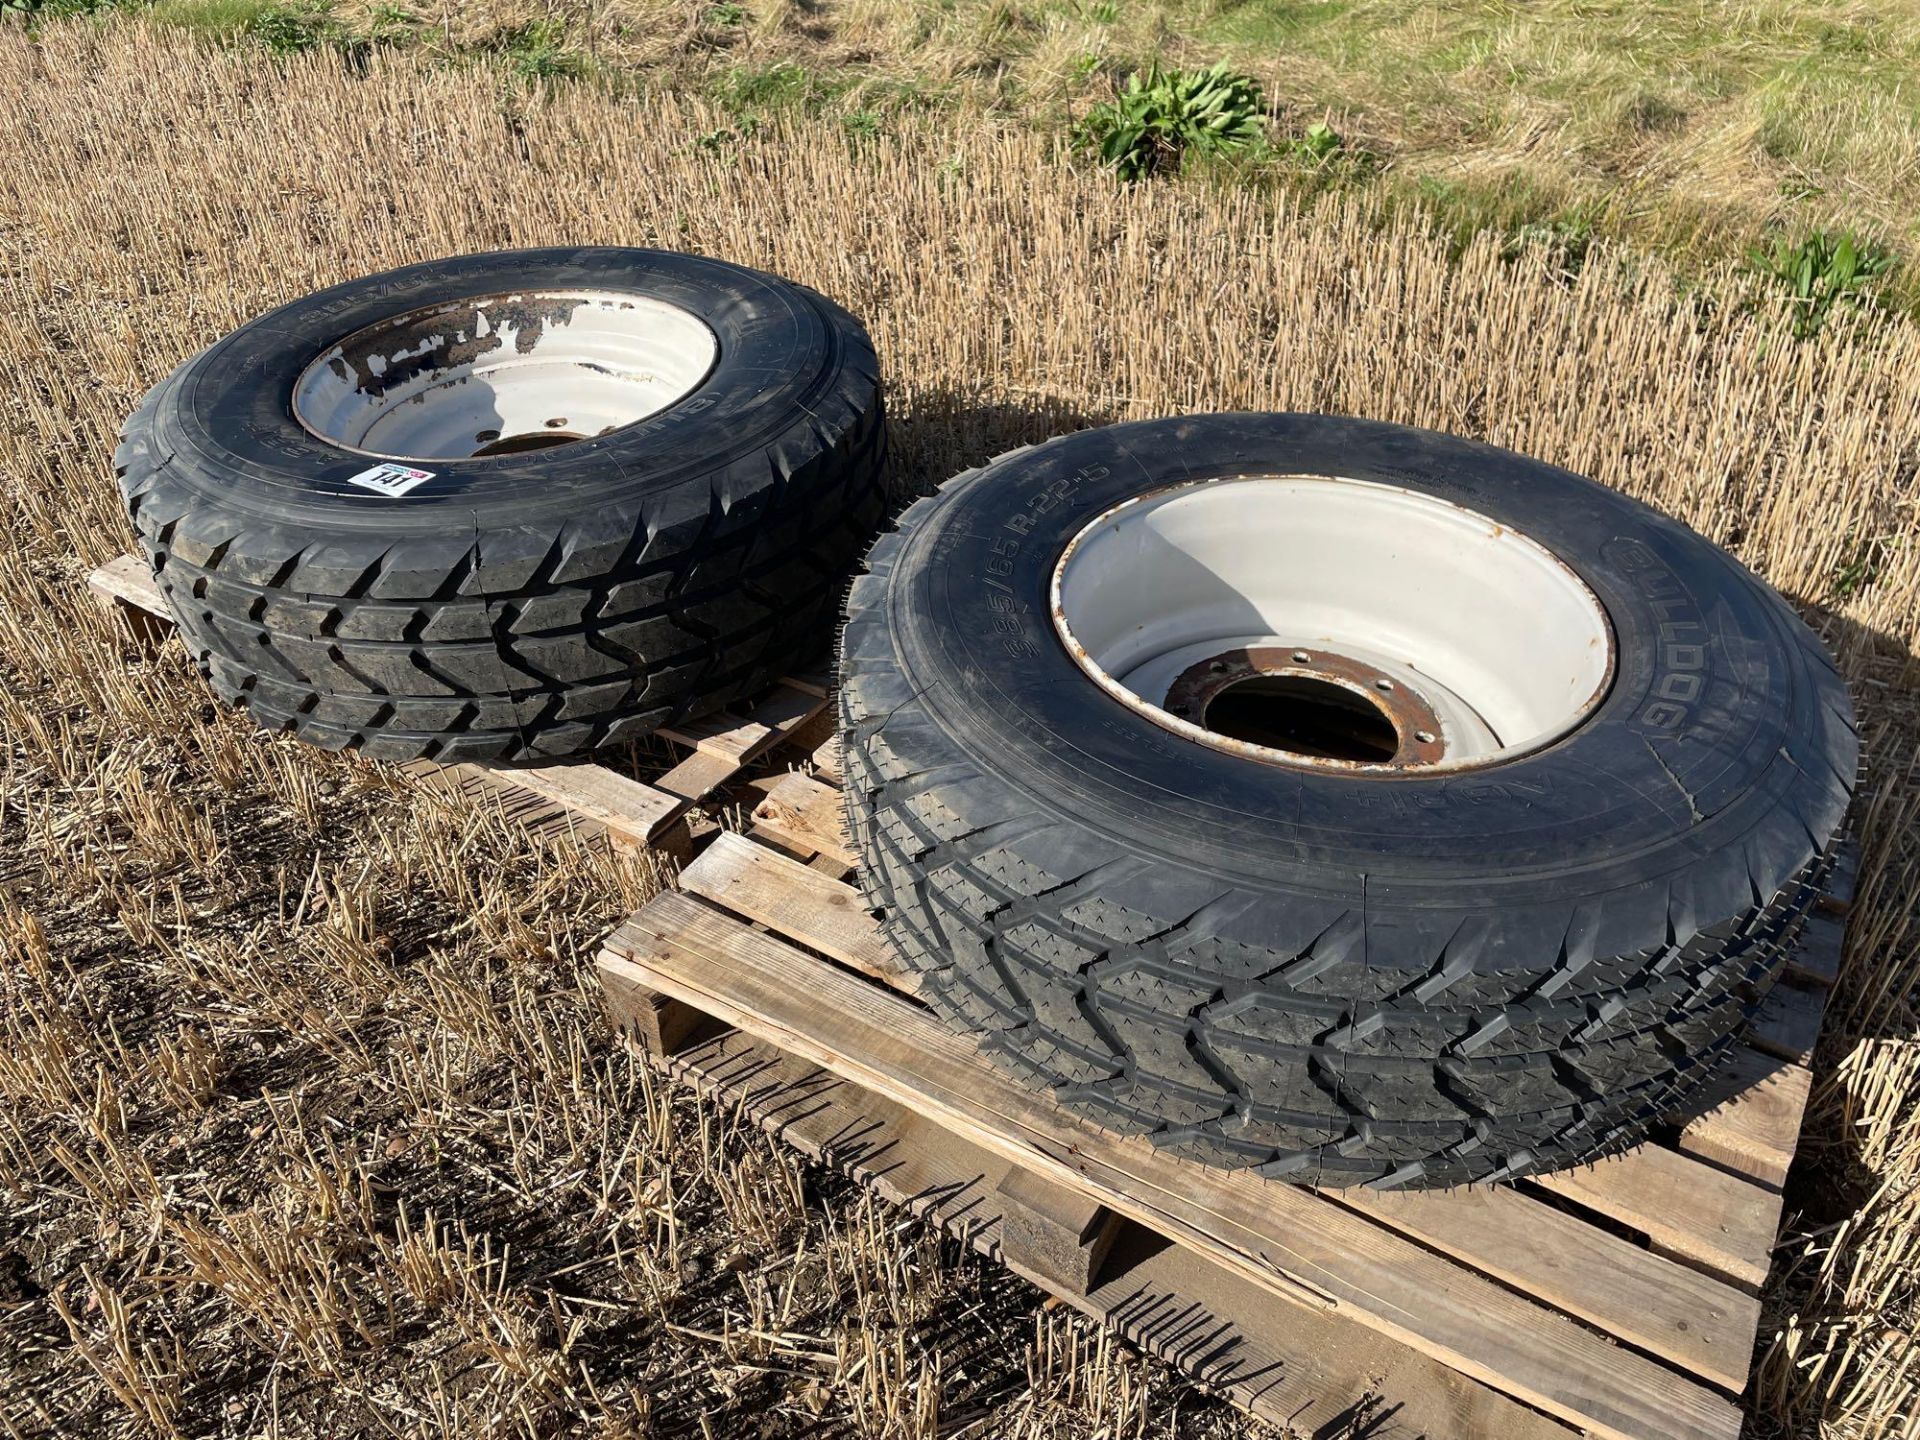 2No. Agrimole 385/65R22.5 8 stud wheels and tyres